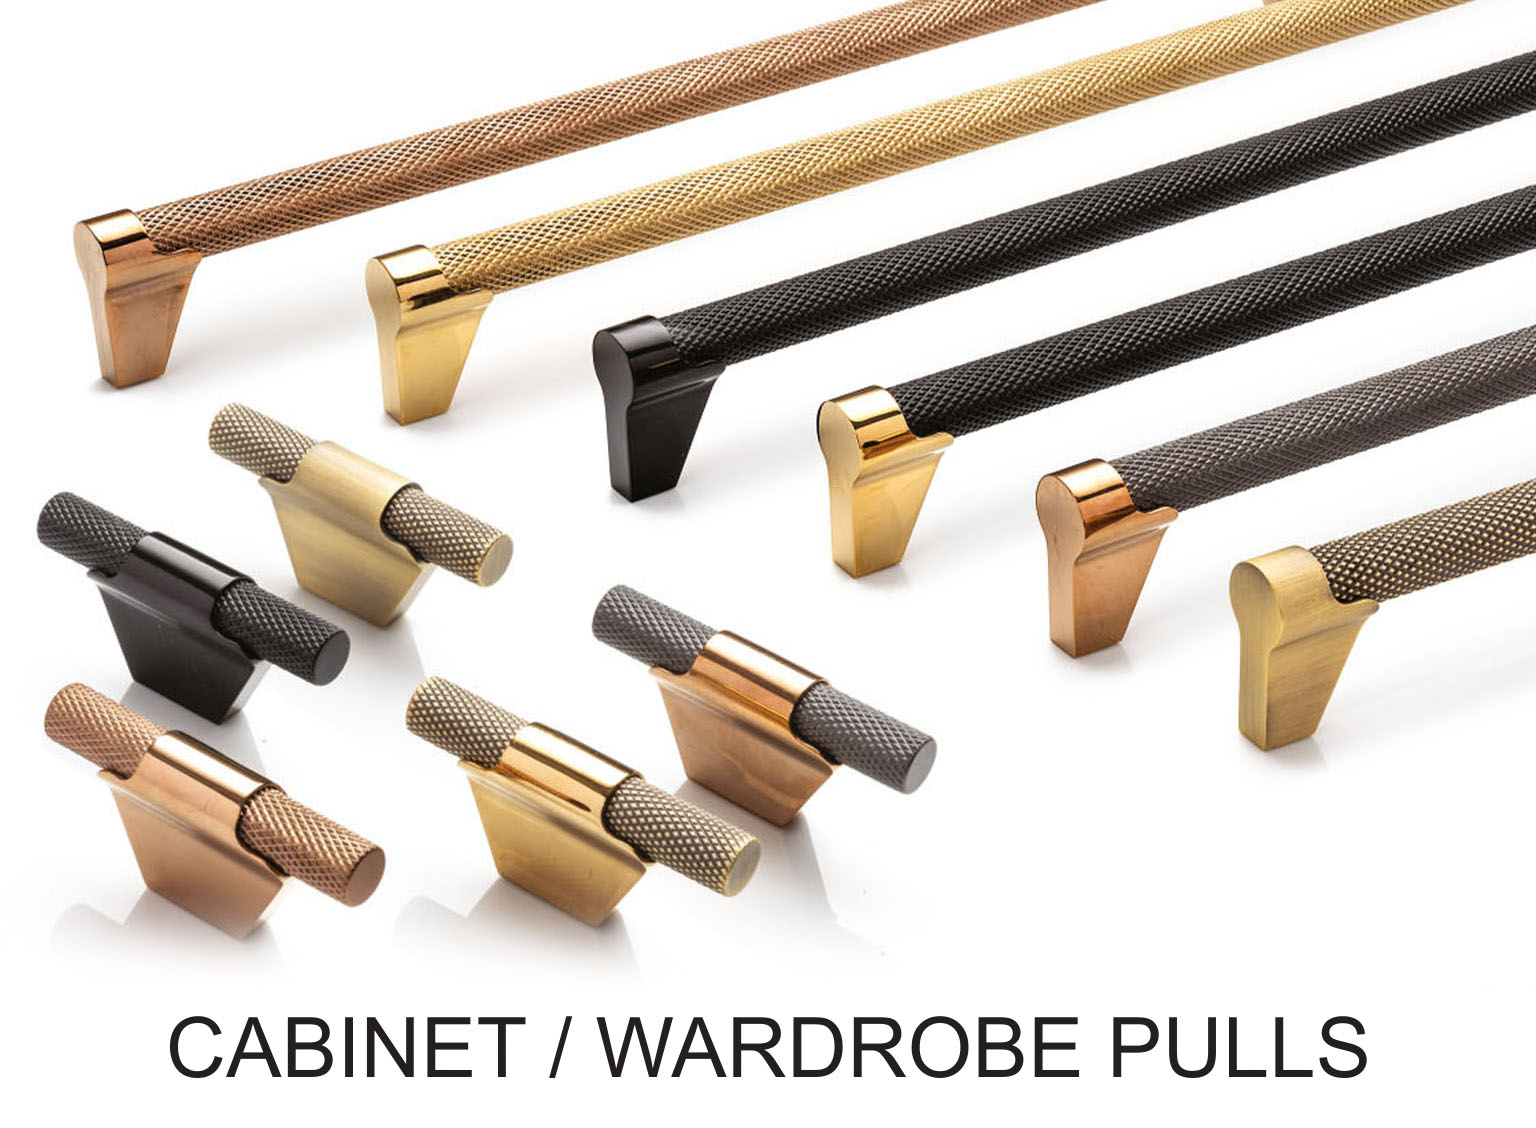 Cabinet Pulls, Knobs and Wardrobe Pulls by Decor Brass Pull Product